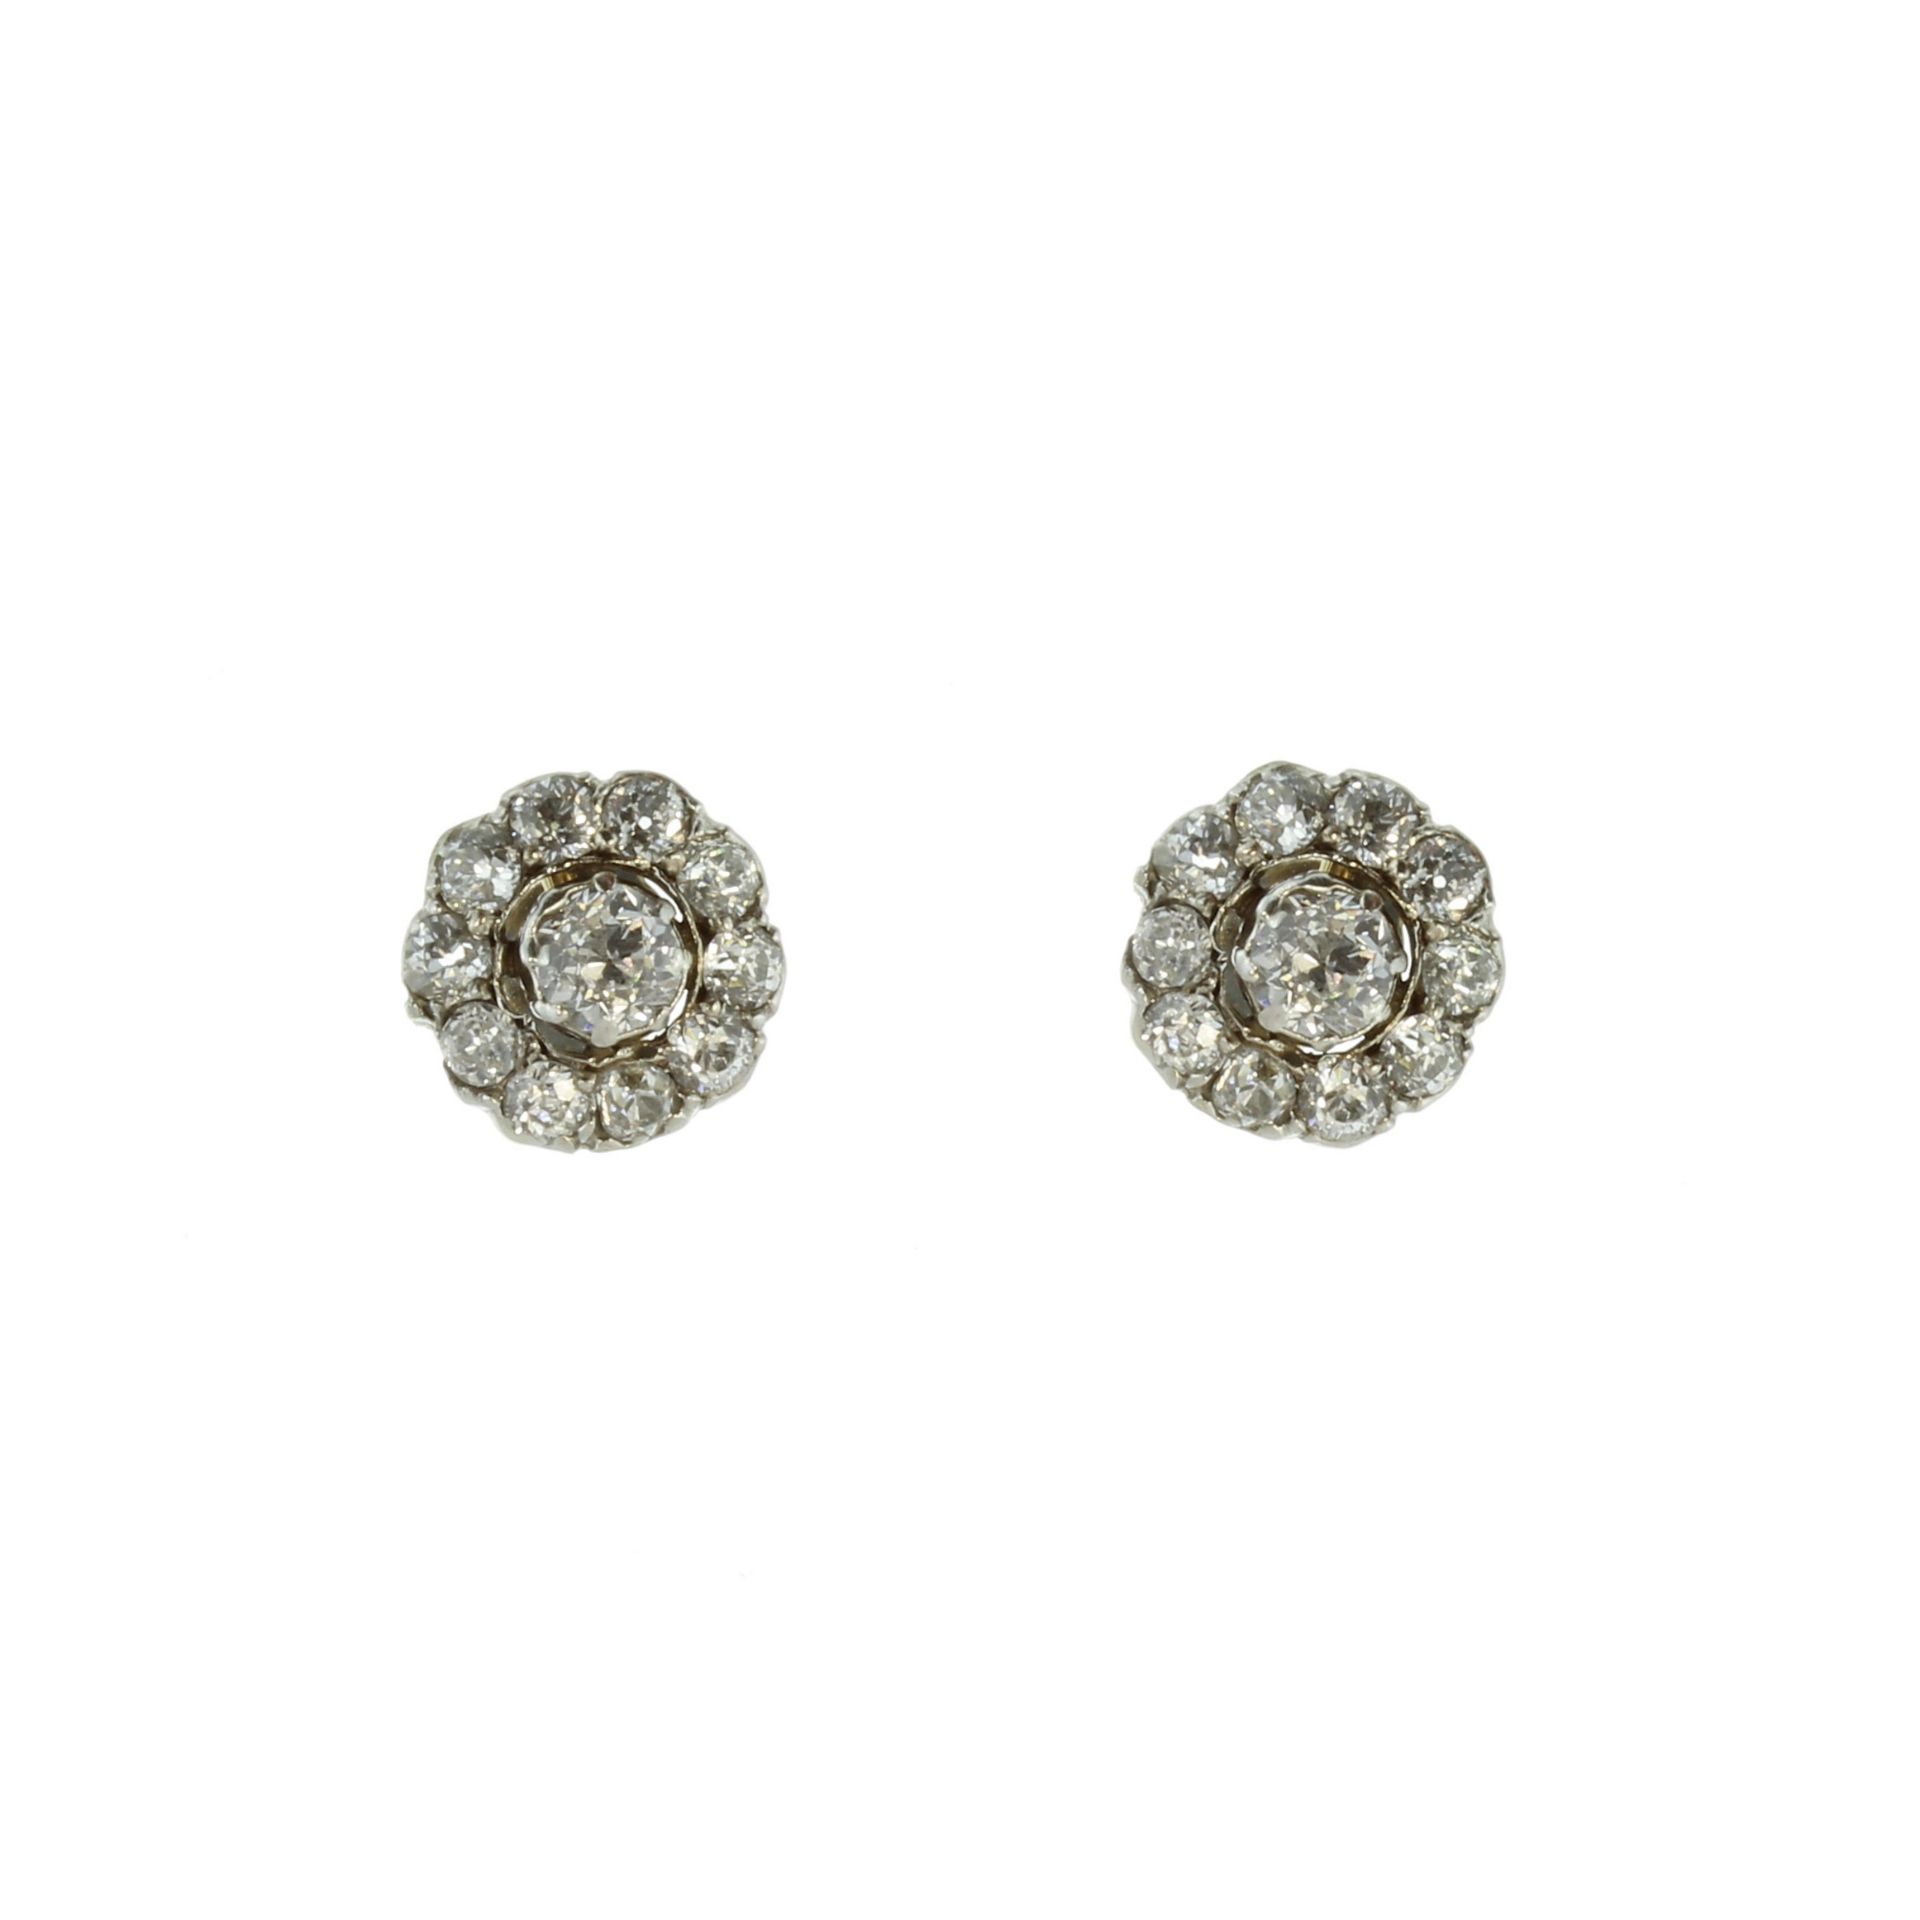 A pair of antique diamond cluster stud earrings in 18ct yellow gold and platinum, each set with a